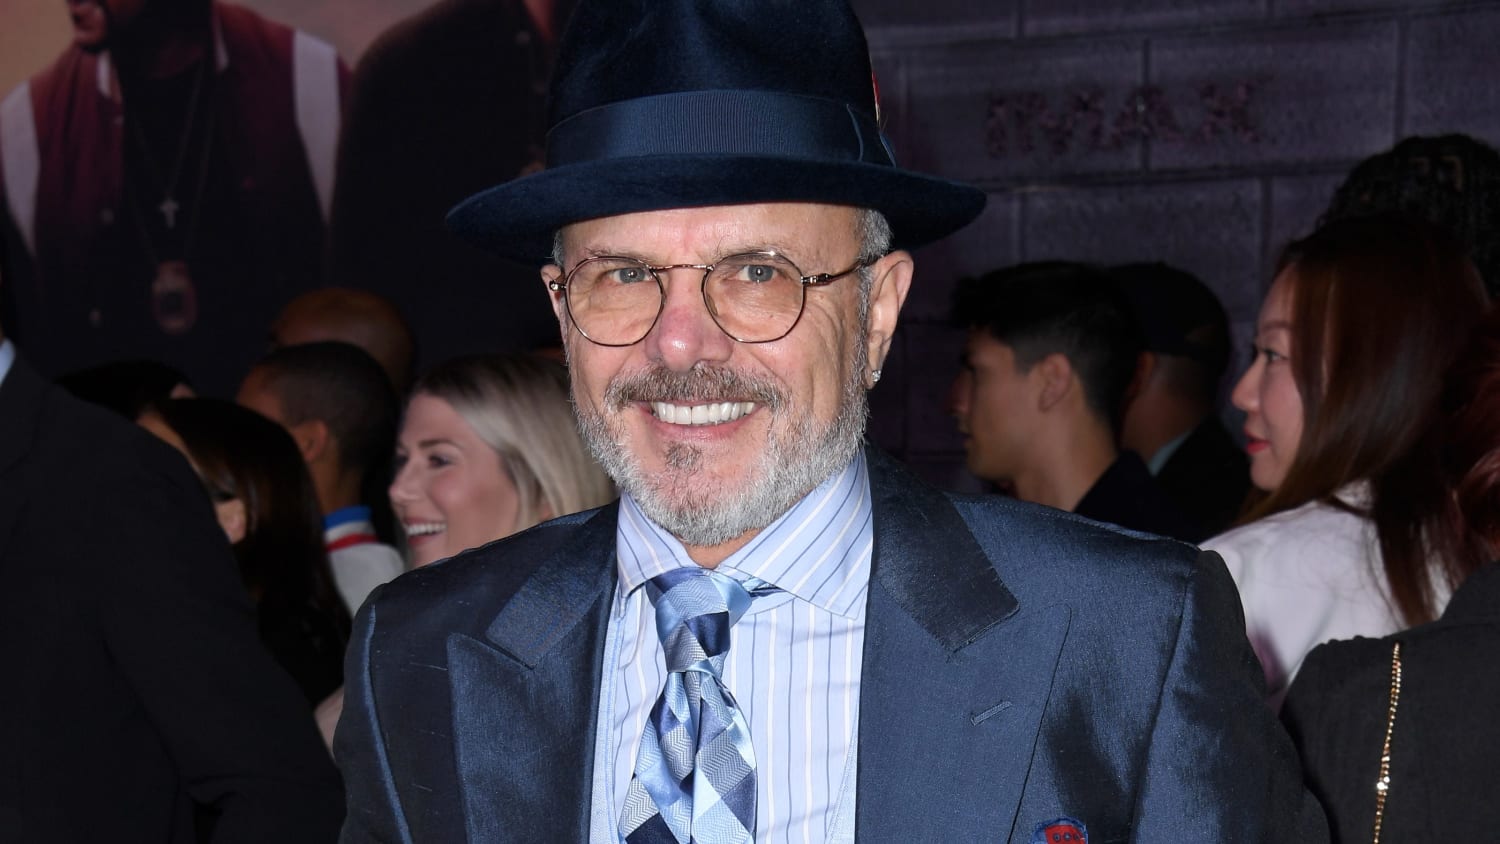 'Sopranos' star Joe Pantoliano suffers 'severe head injury' after being hit by car